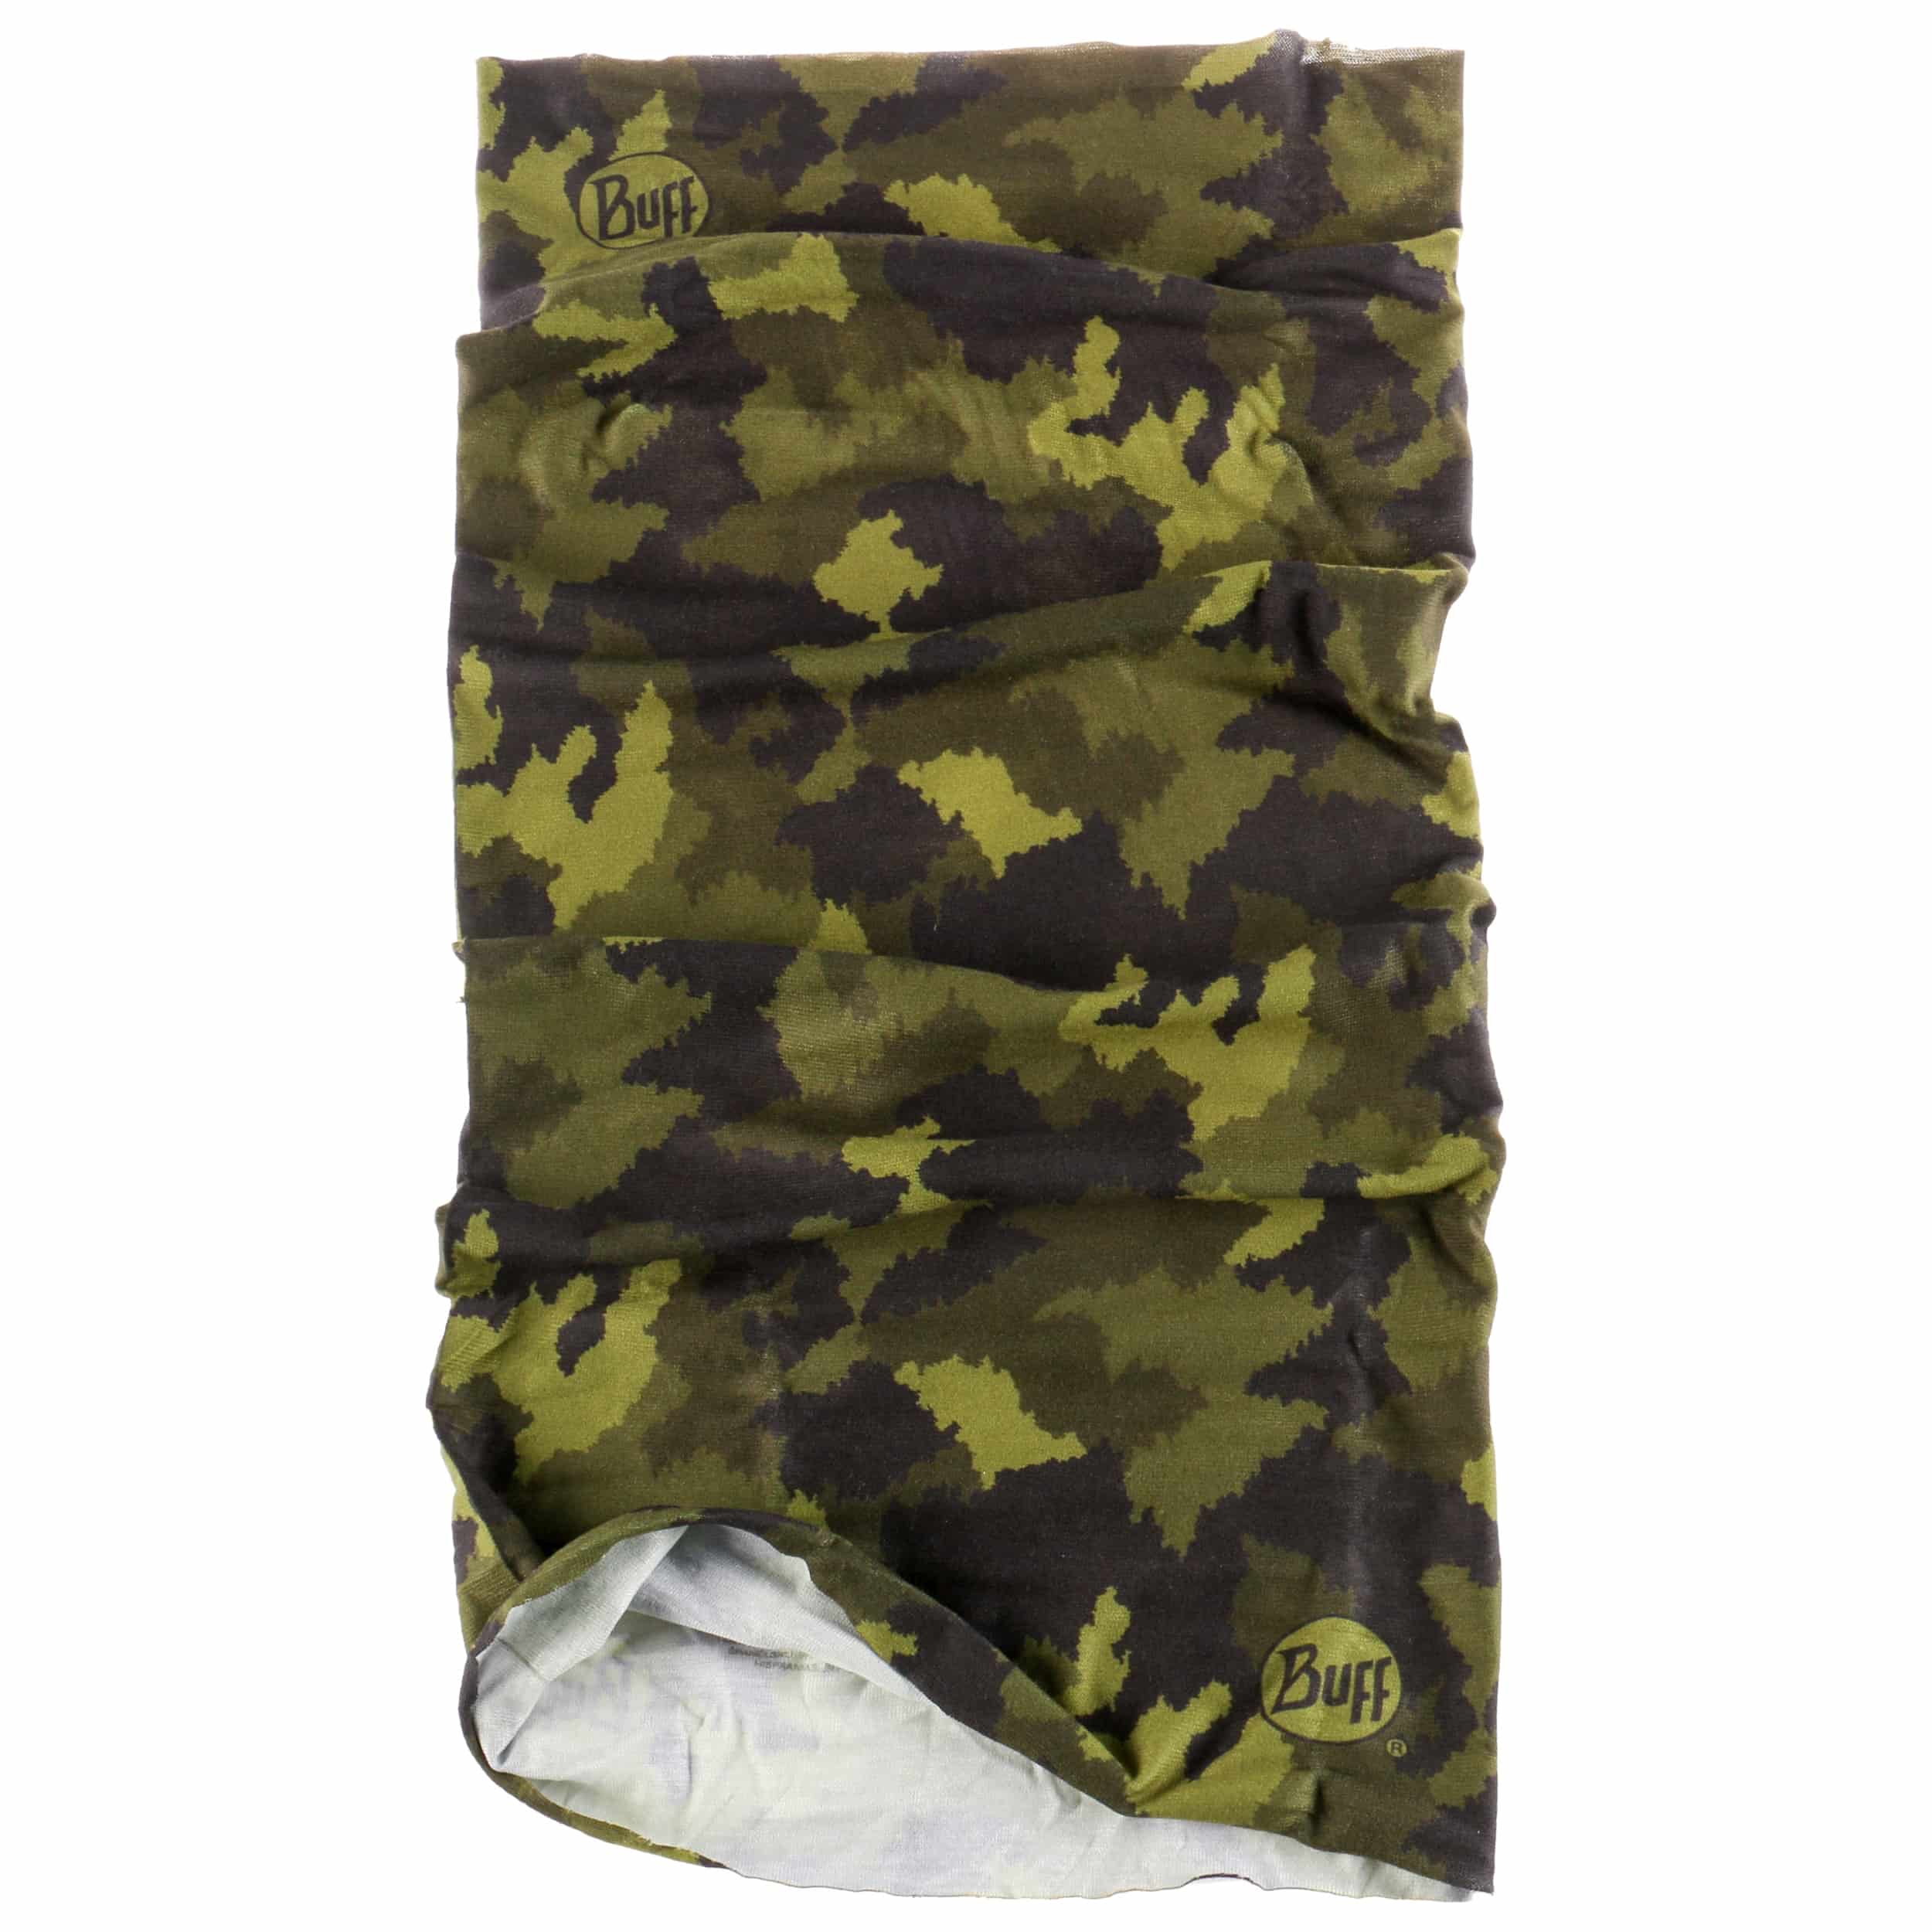 Tour de cou buff dry-cool camouflage Tundra chasseur alpin